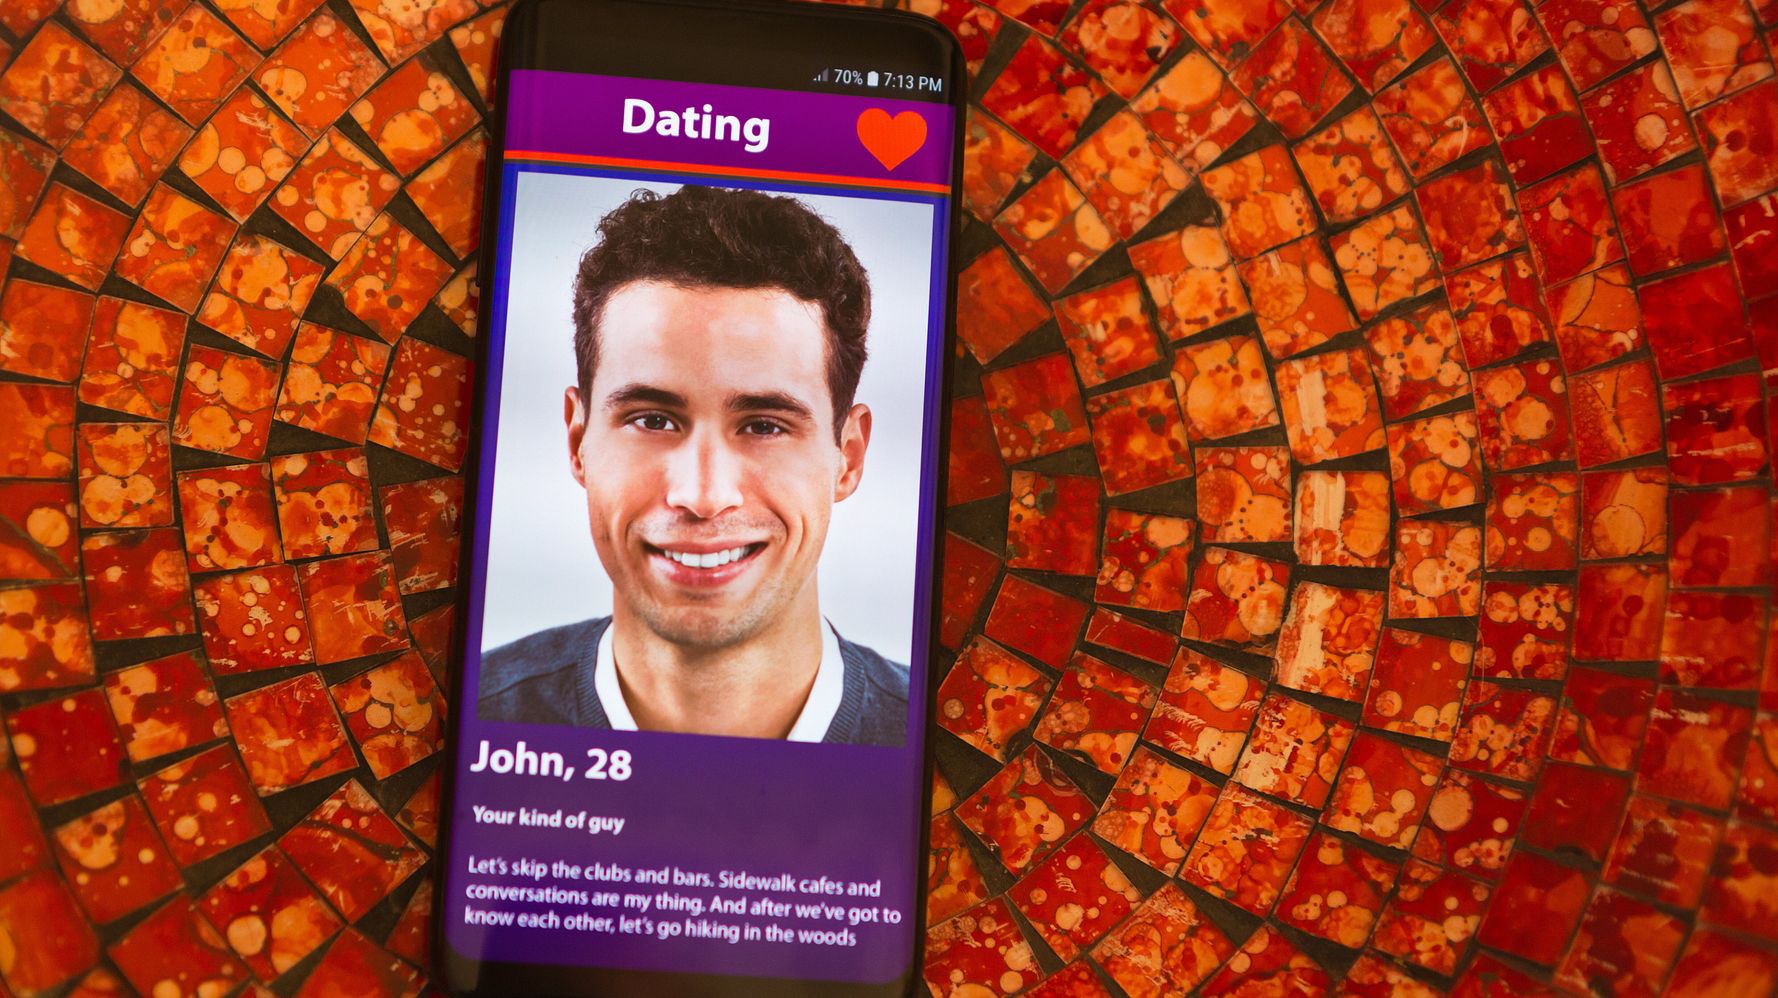 Weird guys on dating sites